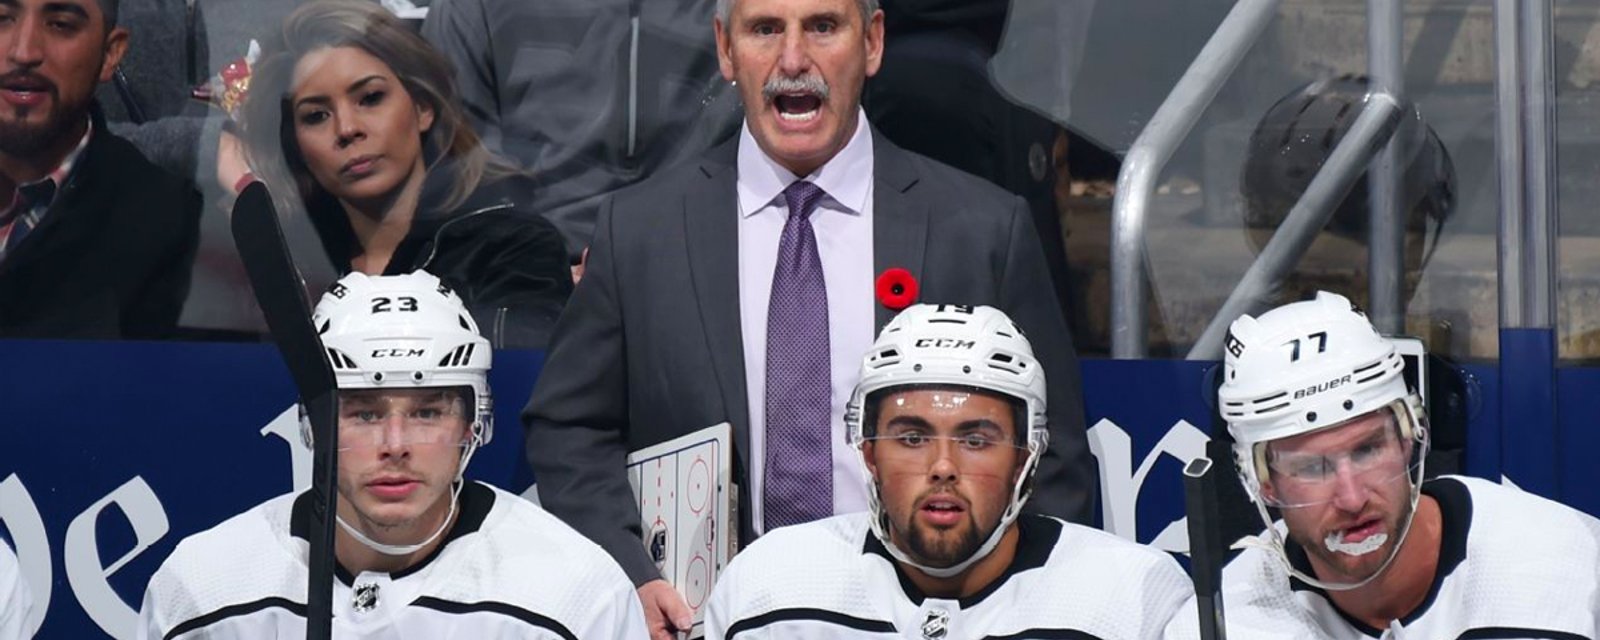 Kings player throws coaching and management staff under the bus following wasted season